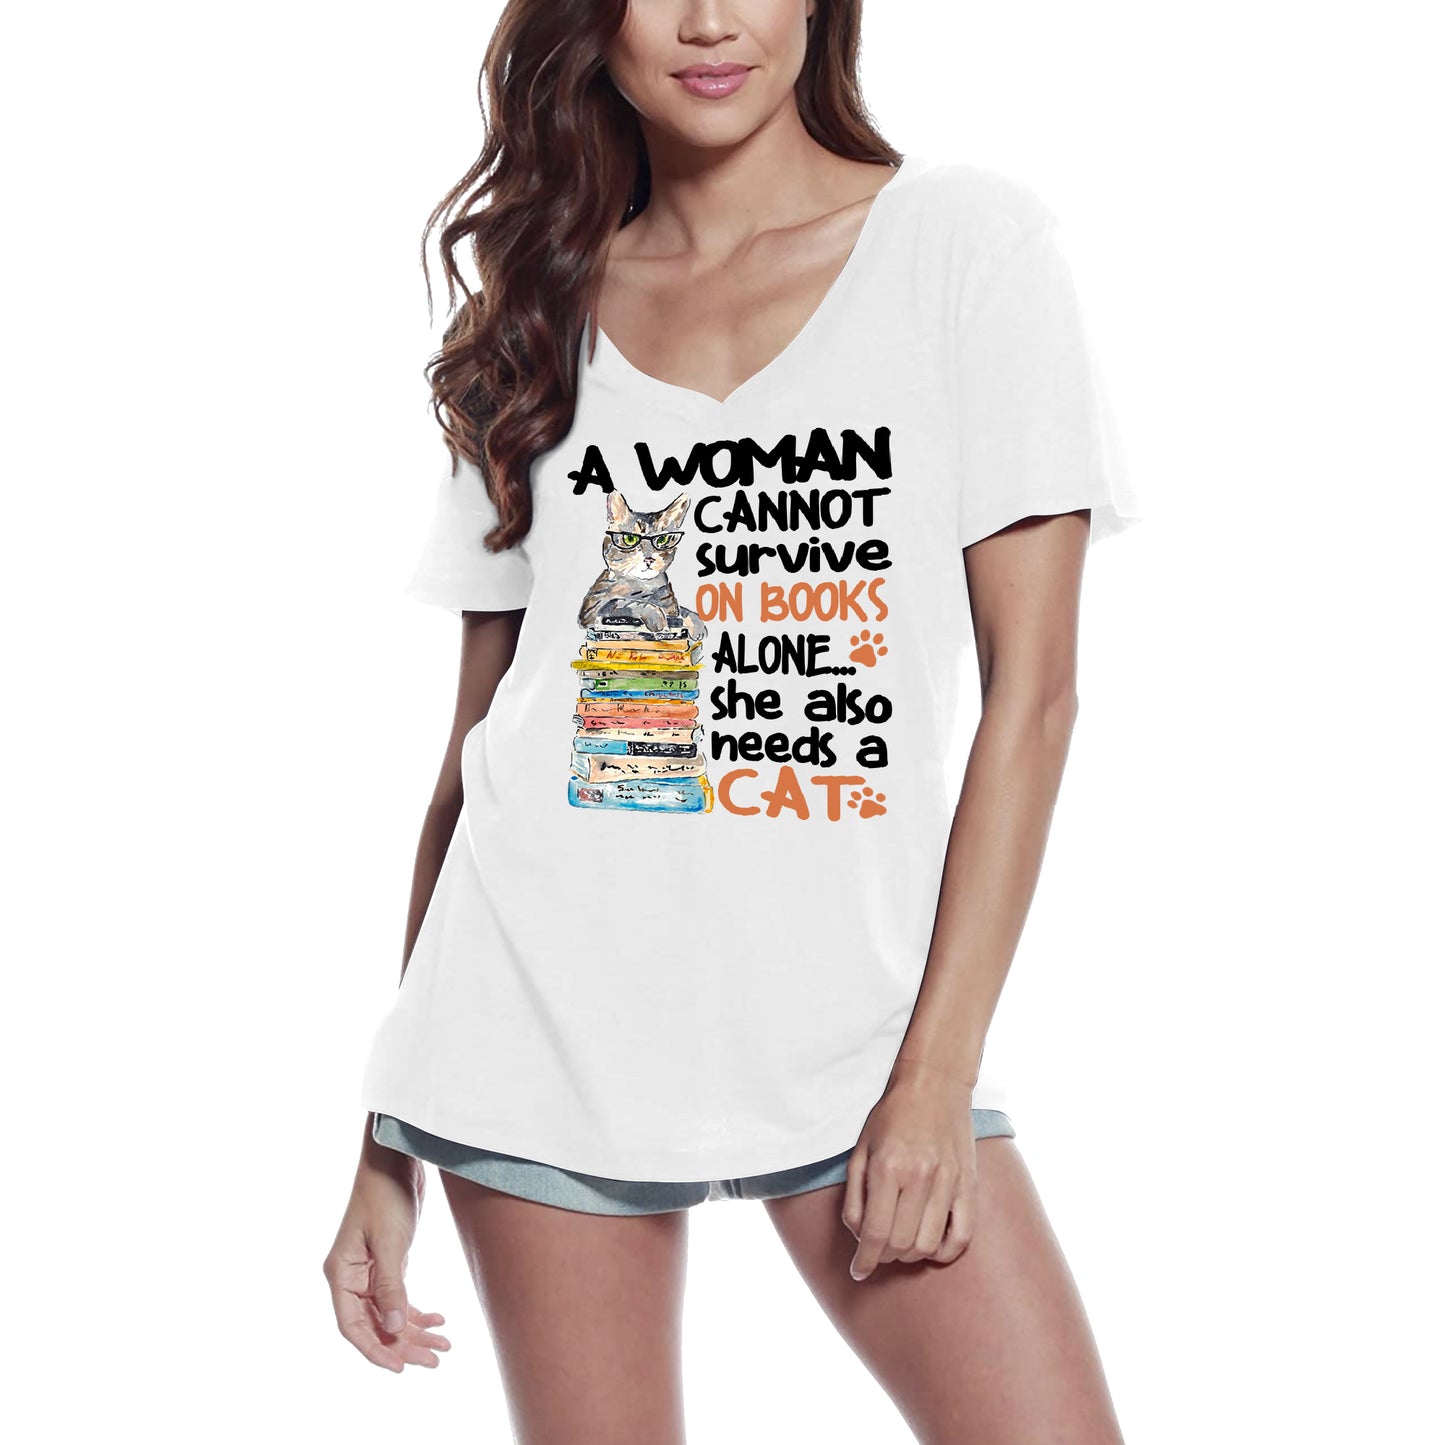 ULTRABASIC Women's T-Shirt A Woman Can Not Survive on Books Alone She Needs Cats - Funny Kitten Shirt for Cat Lovers